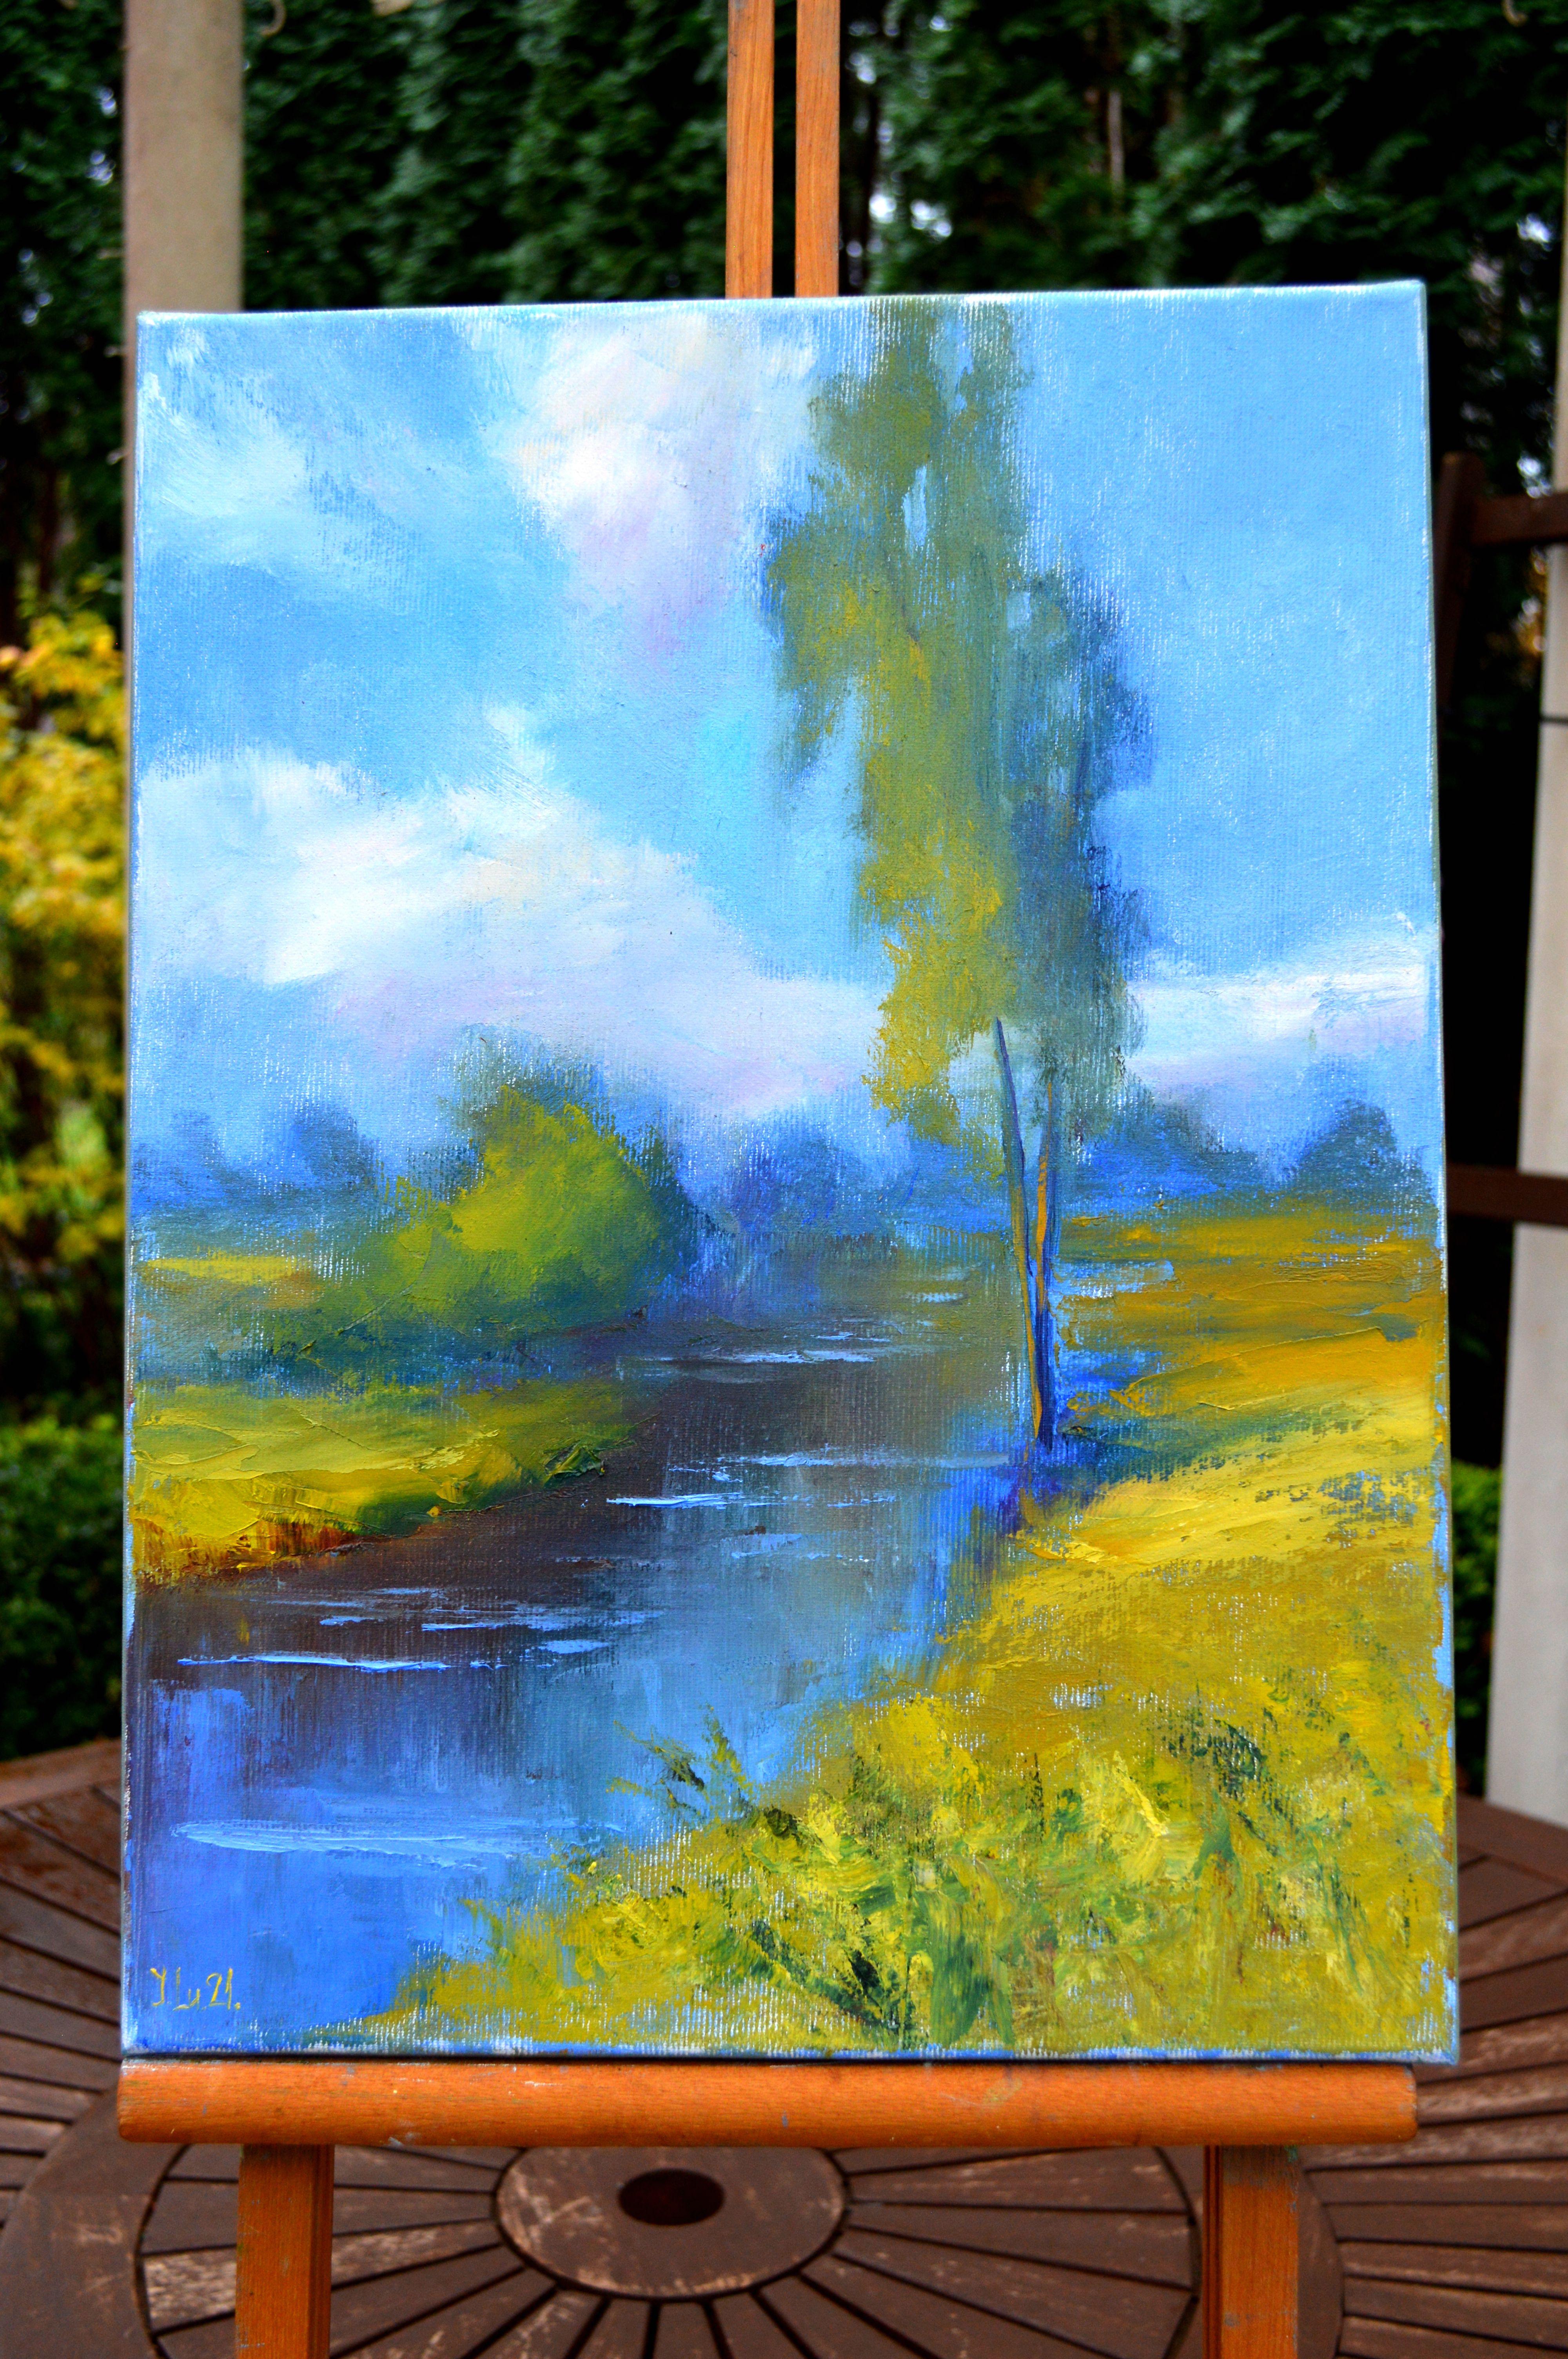 A Village river - Painting by Elena Lukina